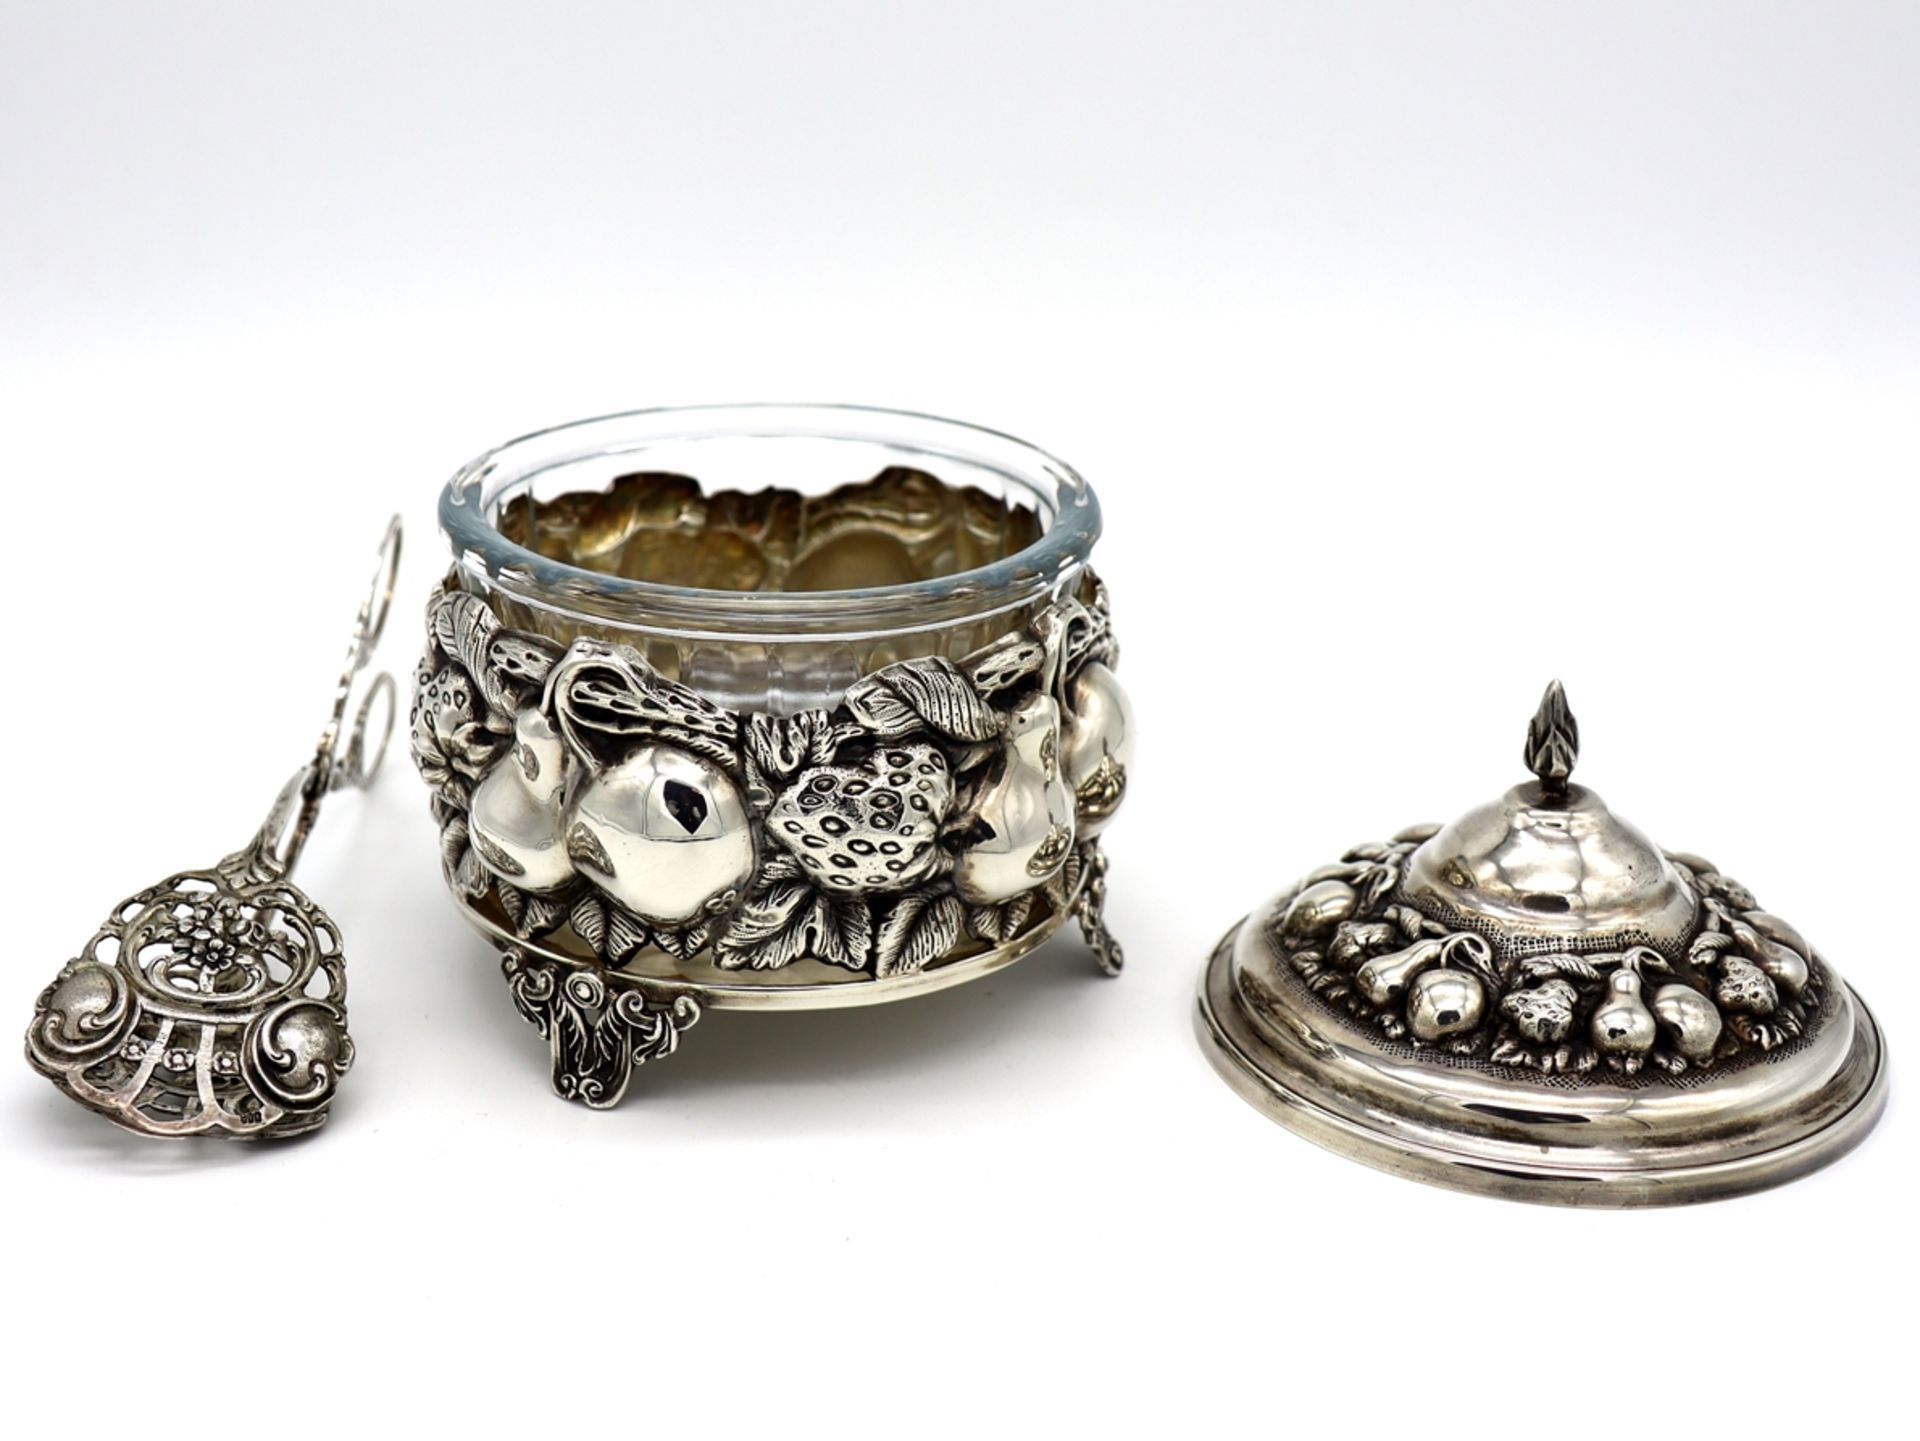 Sugar bowl in fruit decor, sterling silver with glass insert + pastry tongs - Image 6 of 11